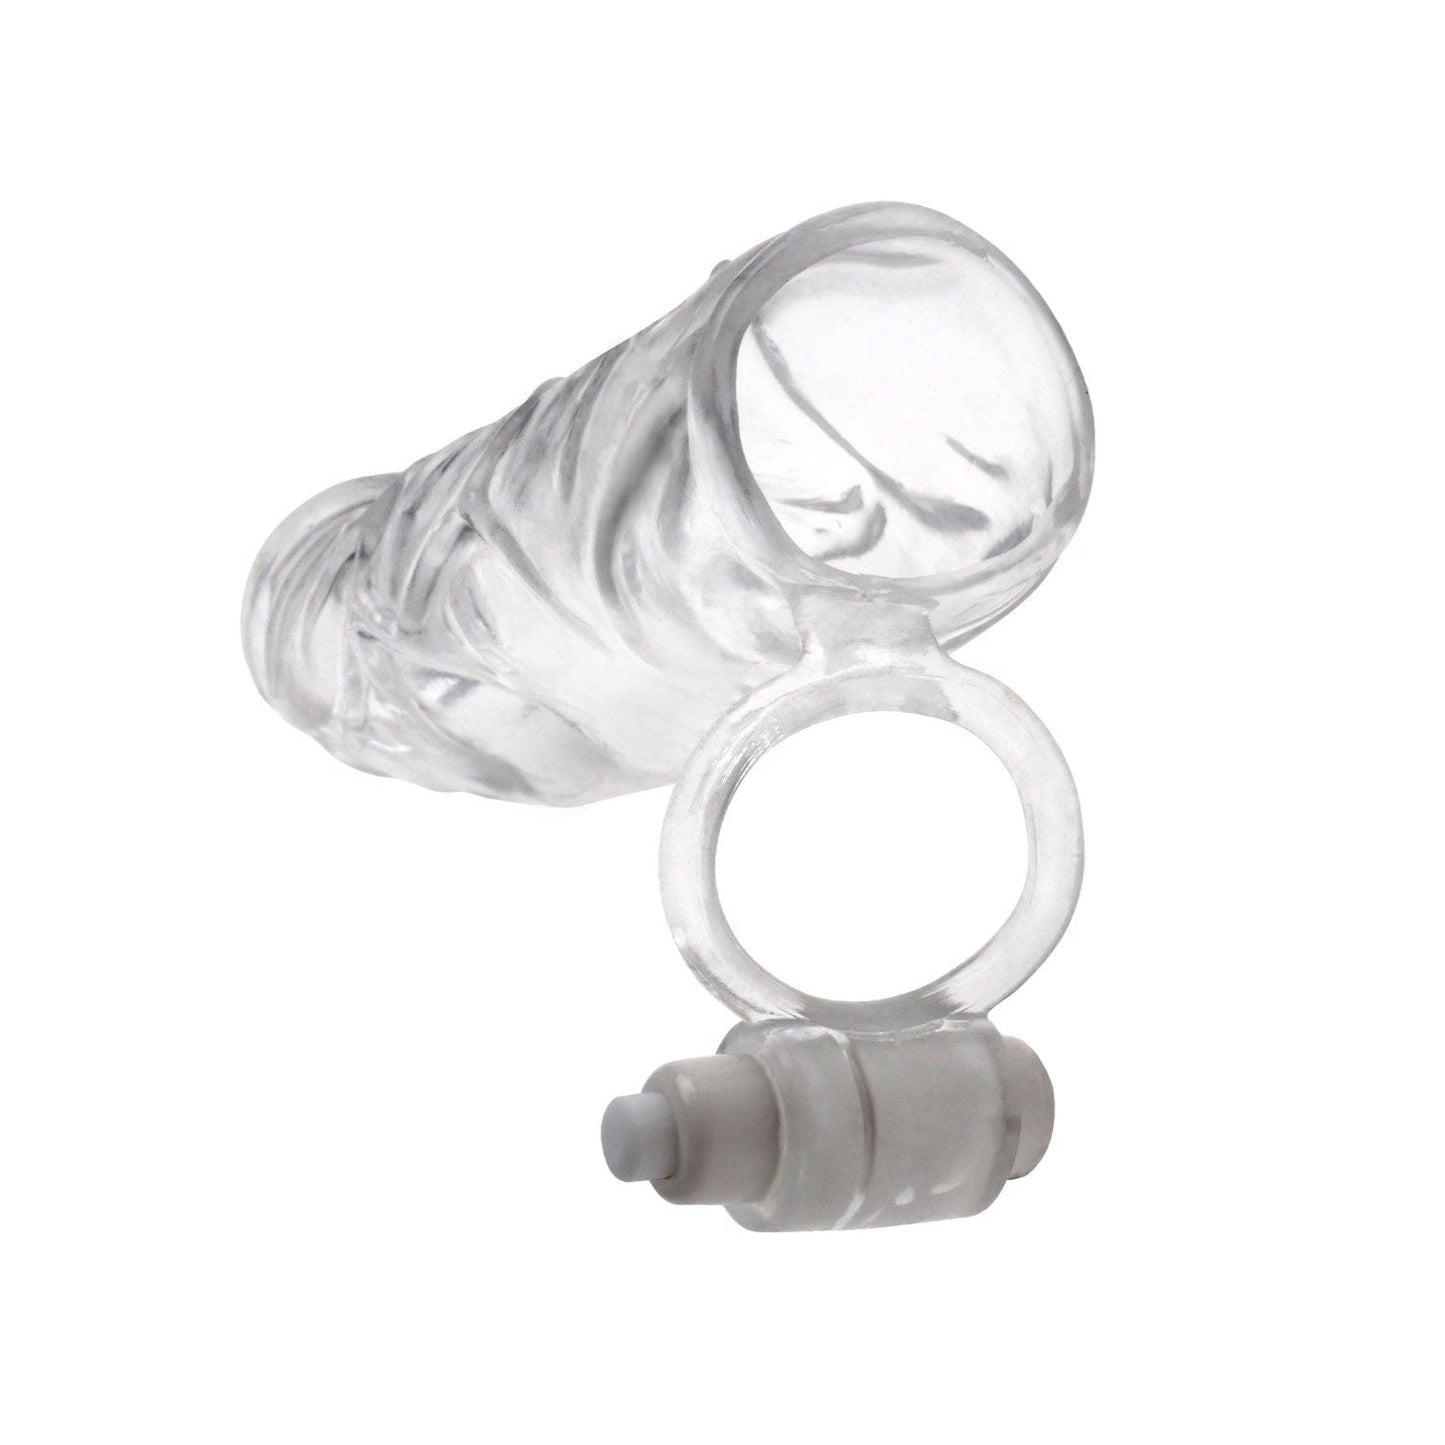 Vibrating Super Sleeve - Clear Penis Extension Sleeve with Vibrating Ball Strap